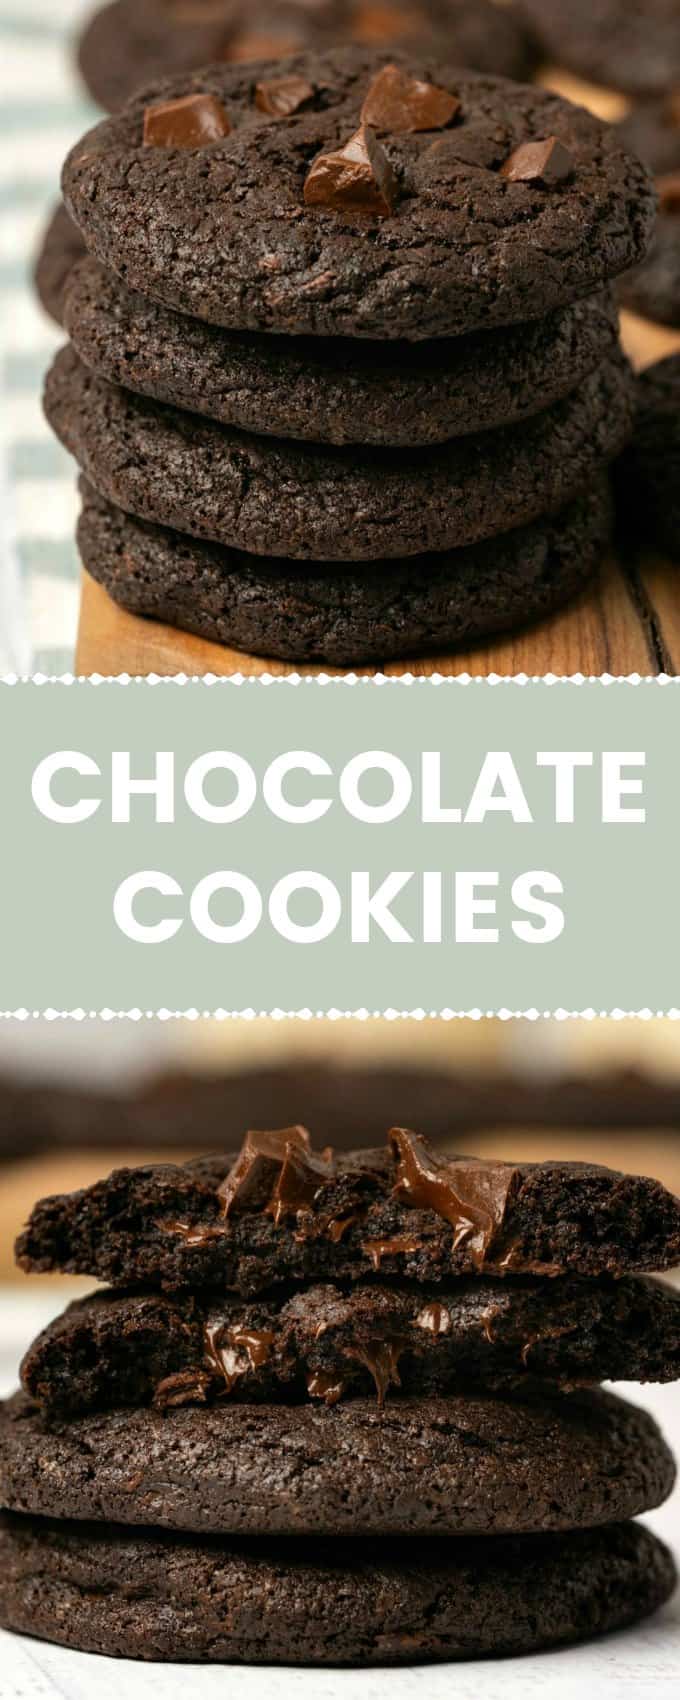 Chocolate Cookies - Gimme That Flavor